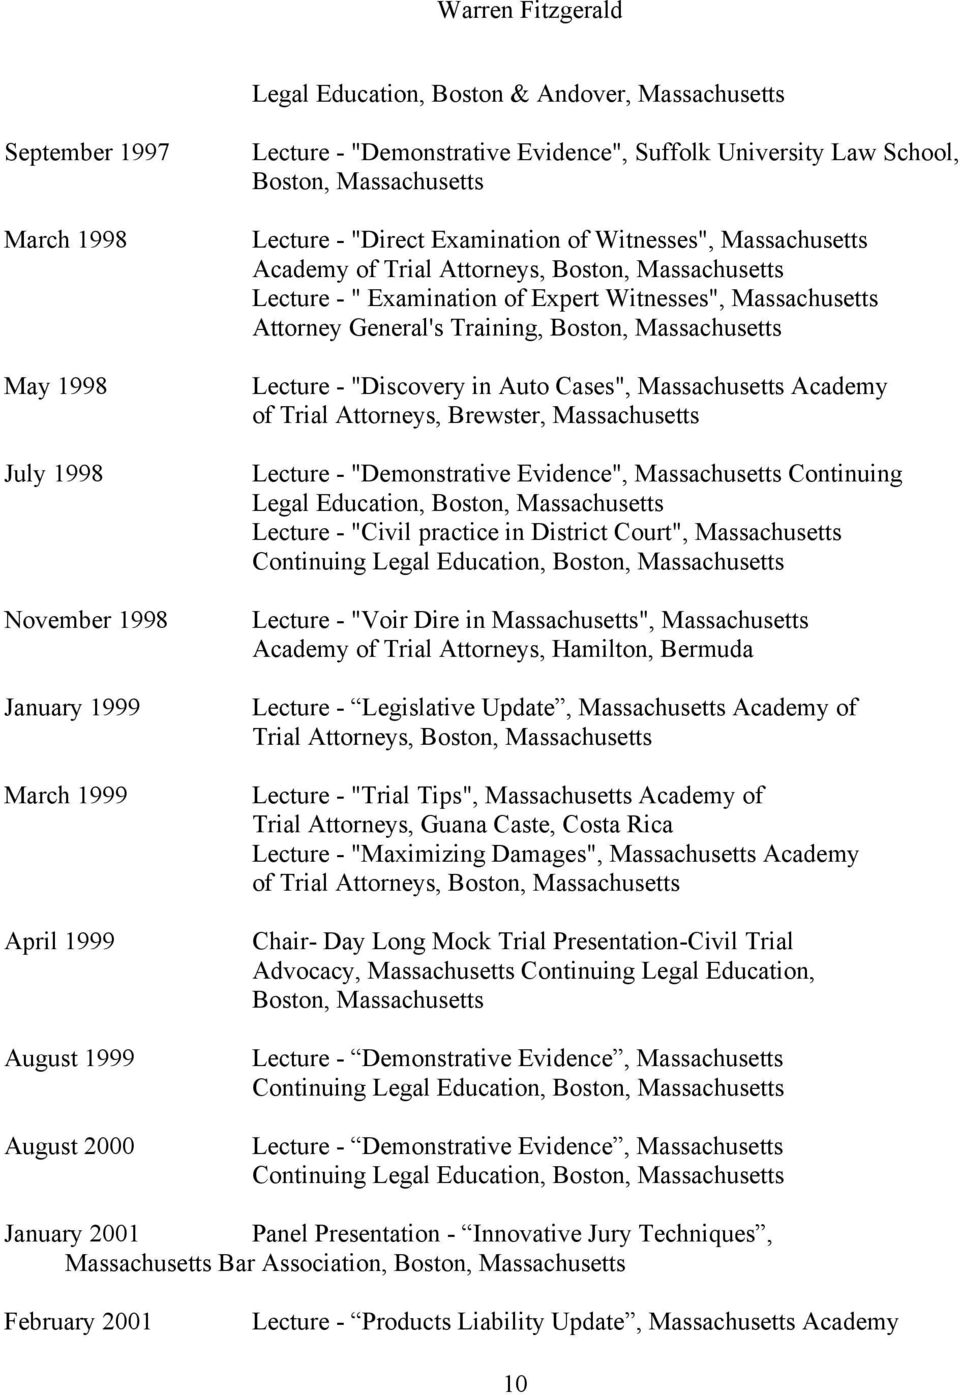 Cases", Academy of Trial Attorneys, Brewster, Lecture - "Demonstrative Evidence", Continuing Lecture - "Civil practice in District Court", Continuing Lecture - "Voir Dire in ", Academy of Trial